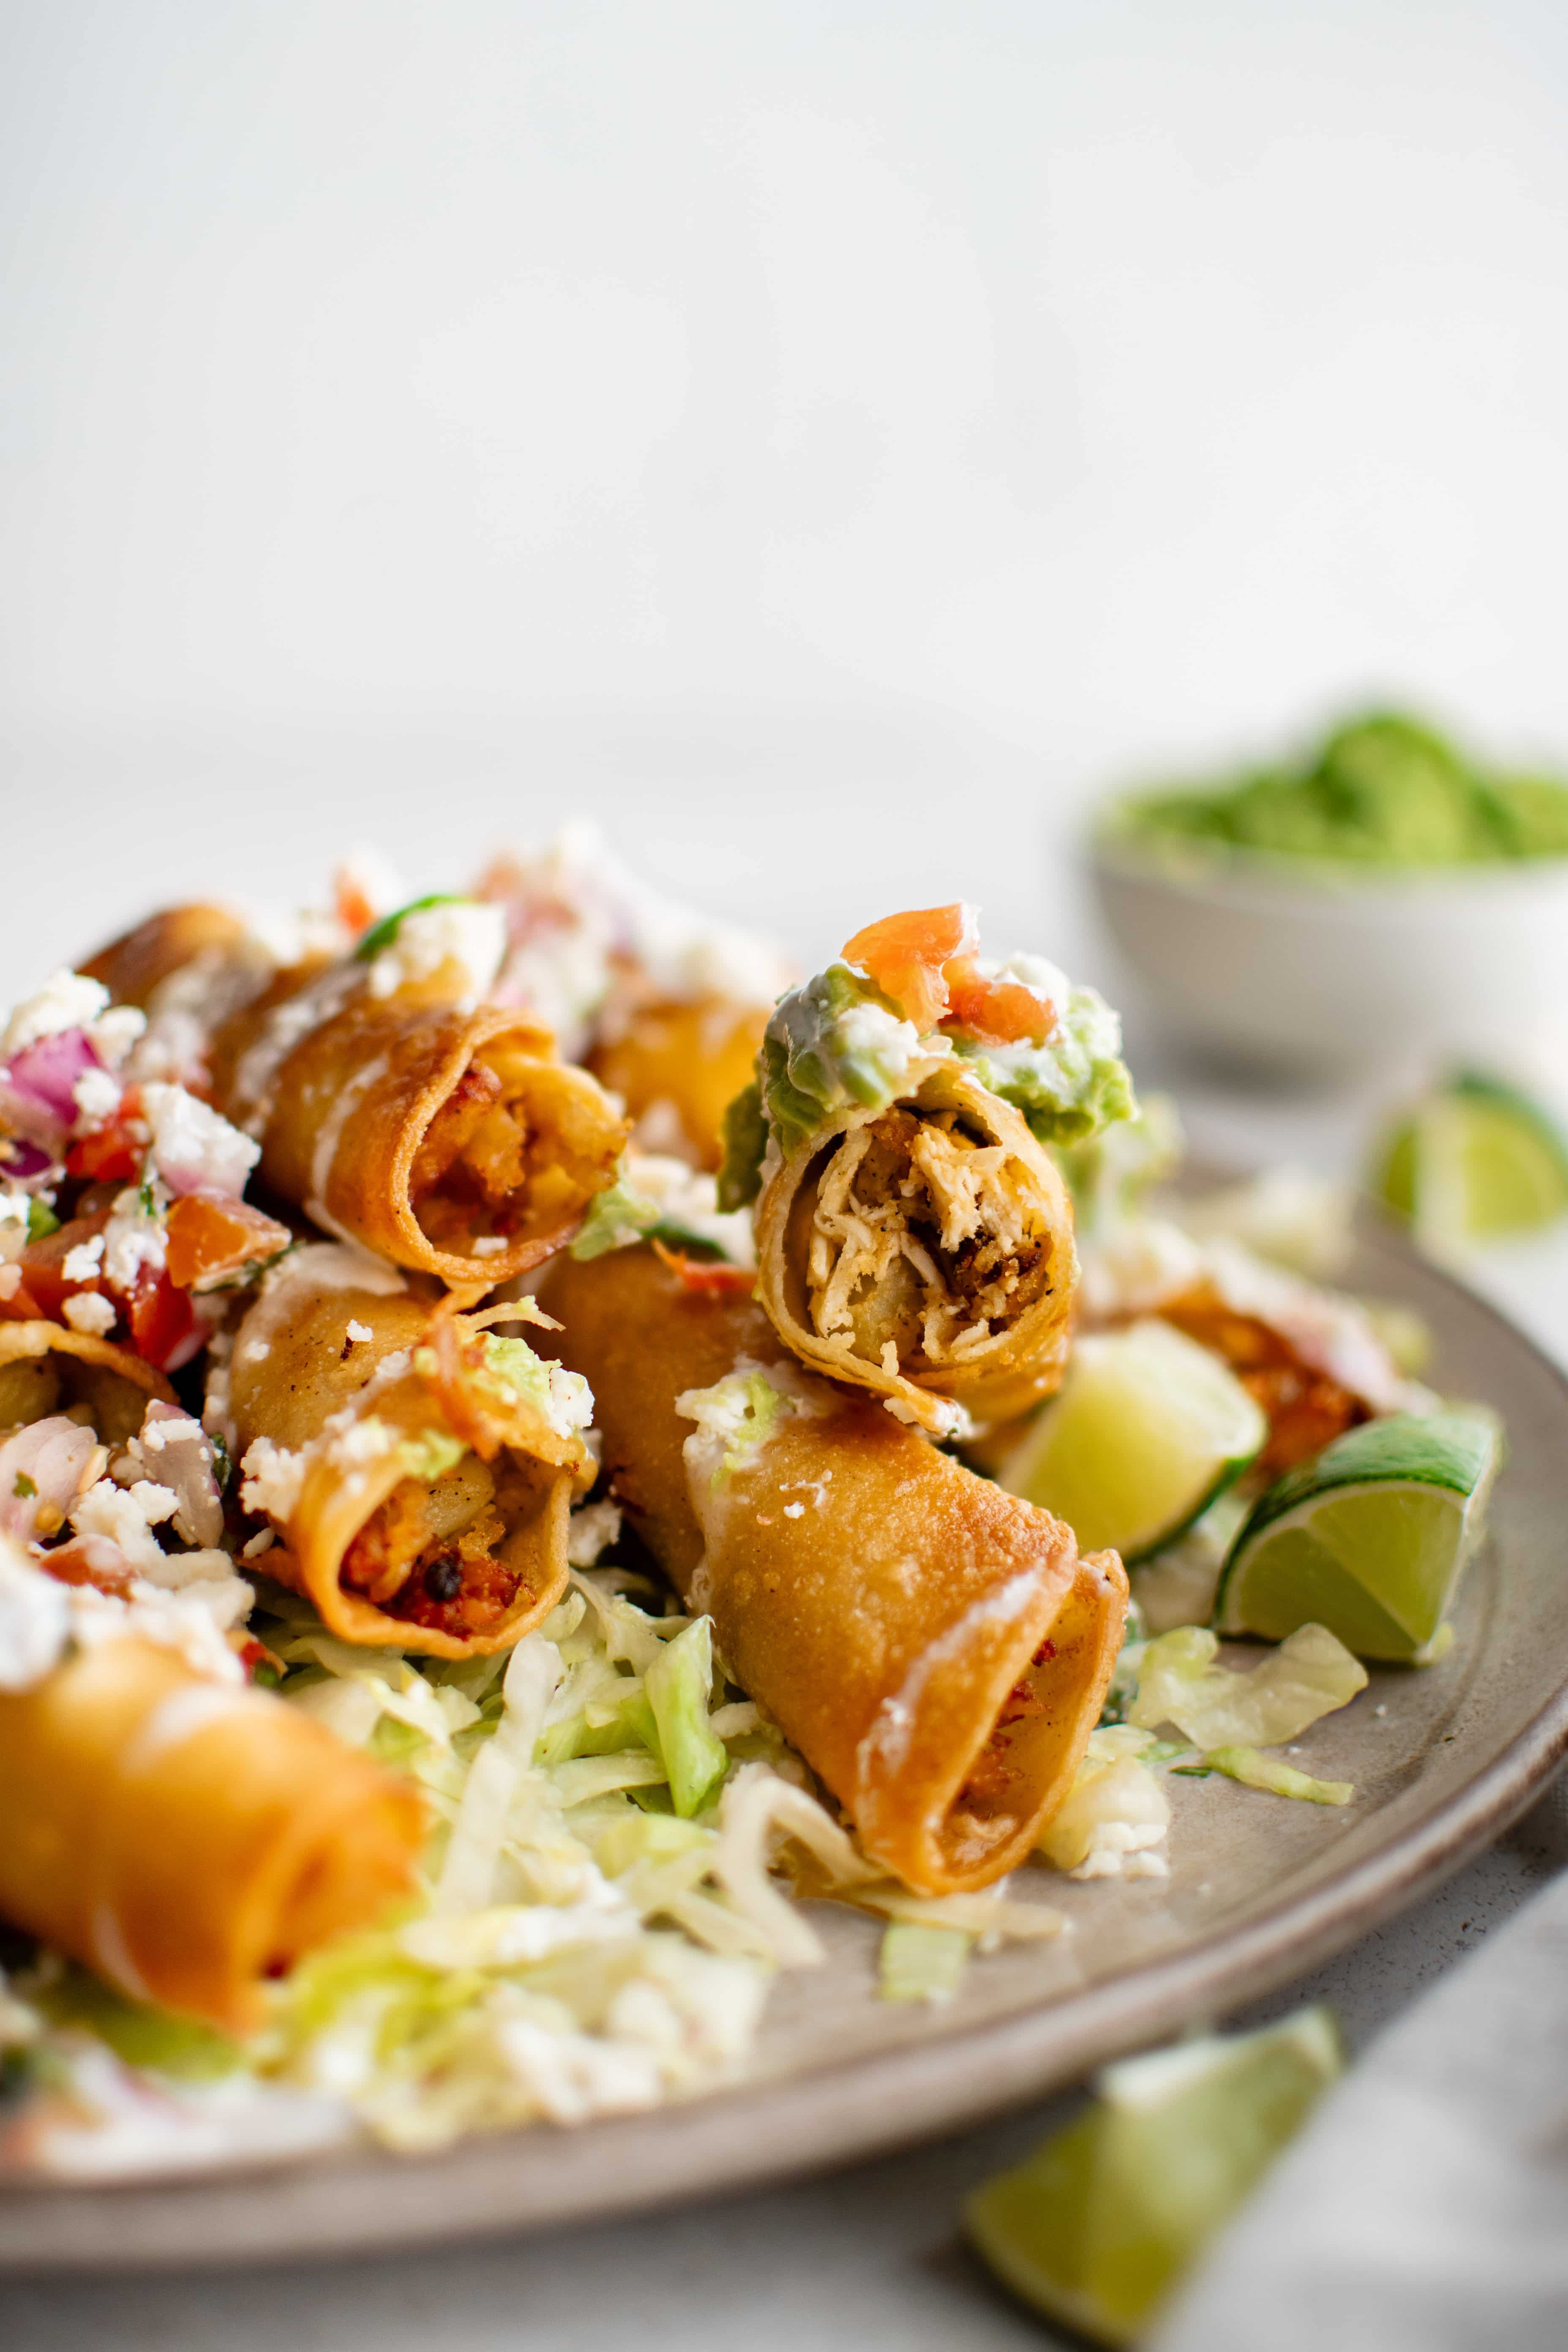 Plate filled with deep-fried chicken and potato flautas de pollo with shredded iceberg lettuce, crumbled cotija cheese, tomatoes, lime wedges, and guacamole.